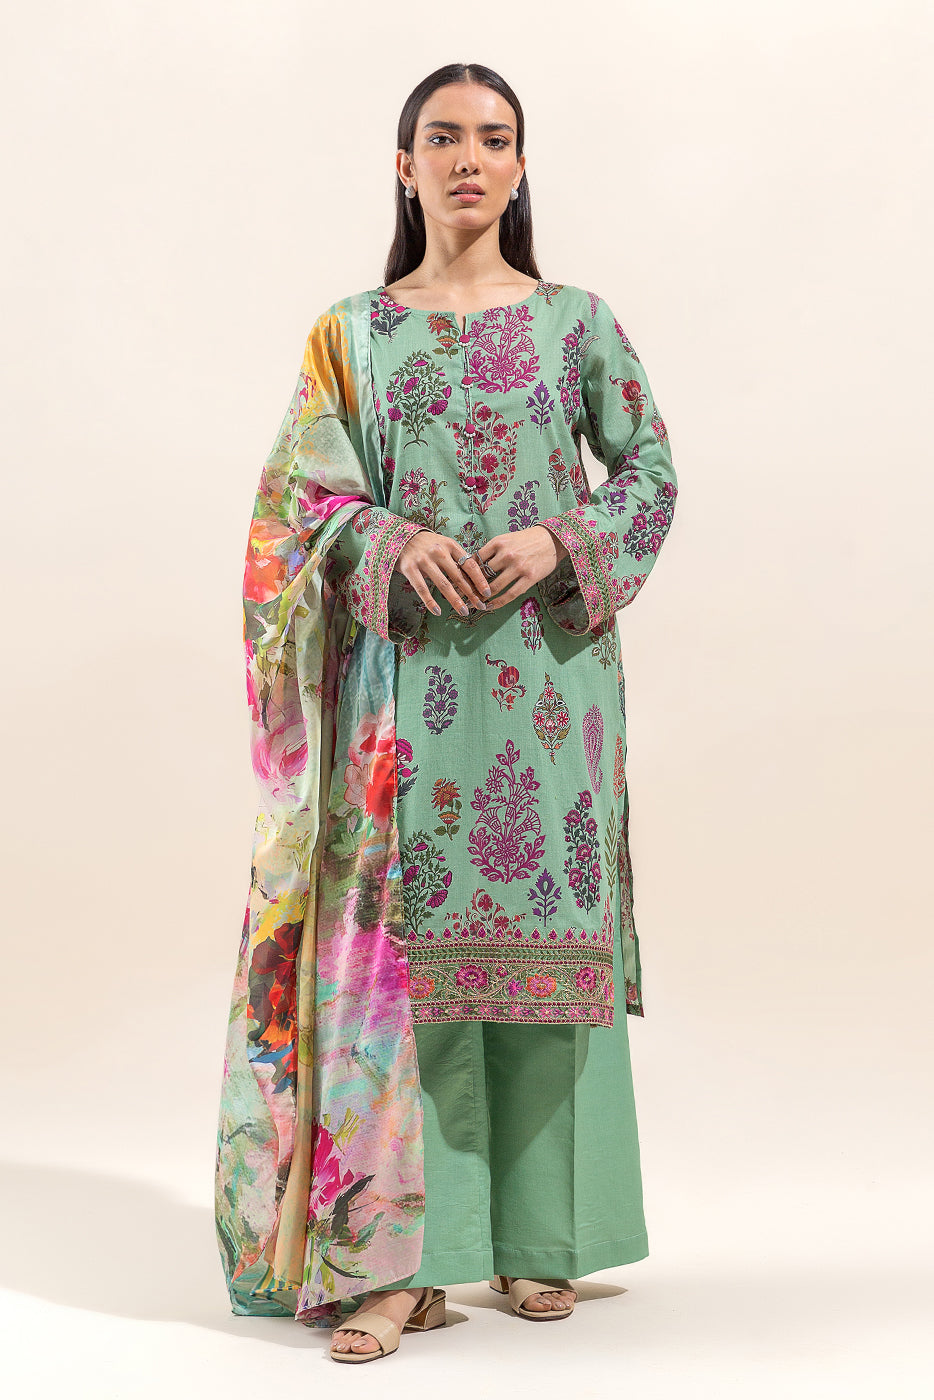 3 PIECE EMBROIDERED LAWN SUIT-DUSKY JADE (UNSTITCHED)